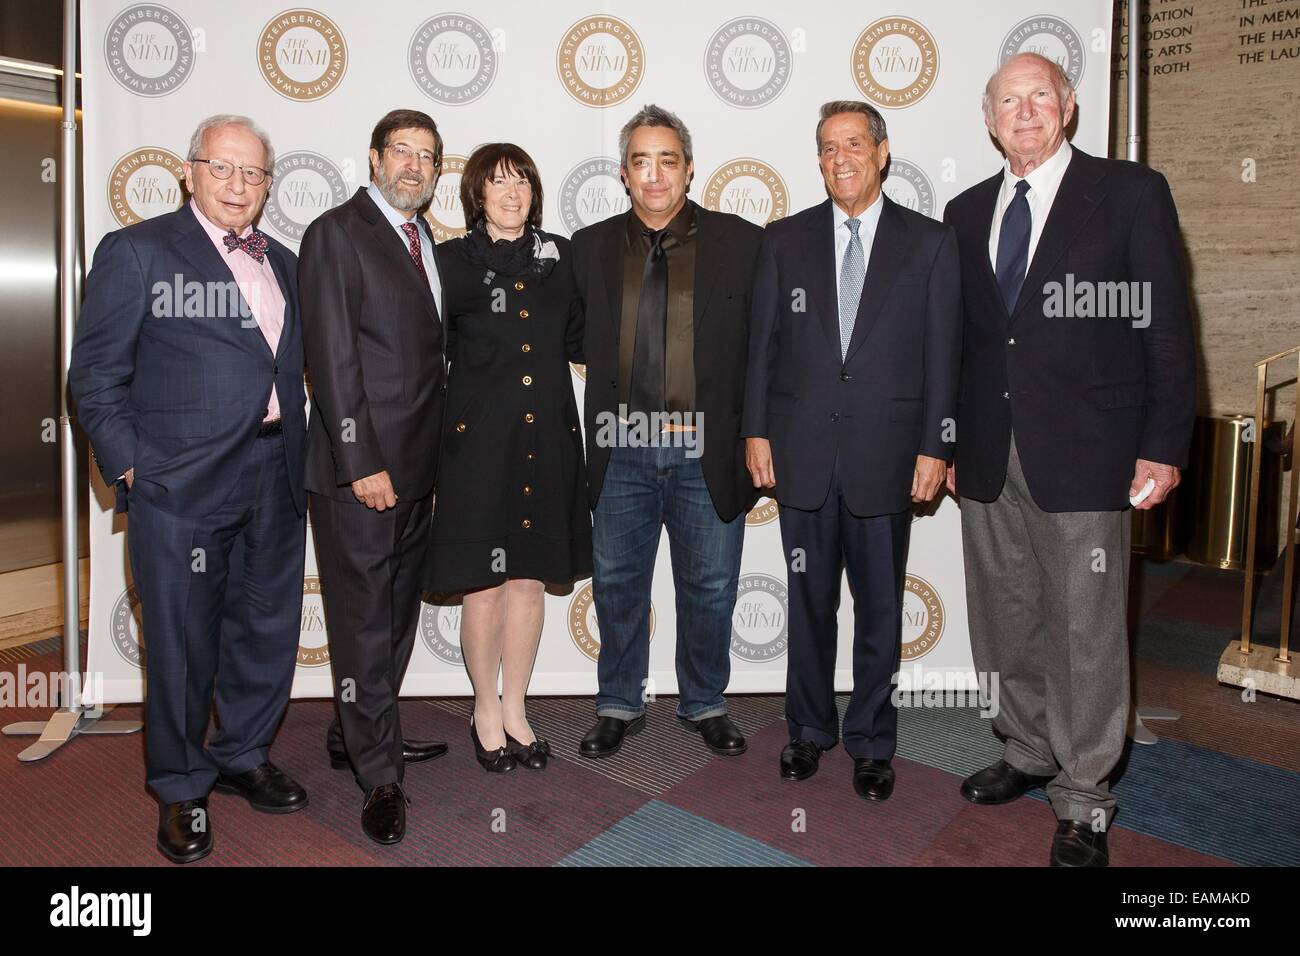 New York, NY, USA. 17th Nov, 2014. William Zabel, James D. Steinberg, Carole Krumland, Stephen Adly Guirgis, Michael Steinberg, Seth Weingarten at arrivals for The Harold and Mimi Steinberg Charitable Trust Host 2014 Steinberg Distinguished Playwright Award, Mitzi E. Newhouse Theater at Lincoln Center, New York, NY November 17, 2014. Credit:  Jason Smith/Everett Collection/Alamy Live News Stock Photo